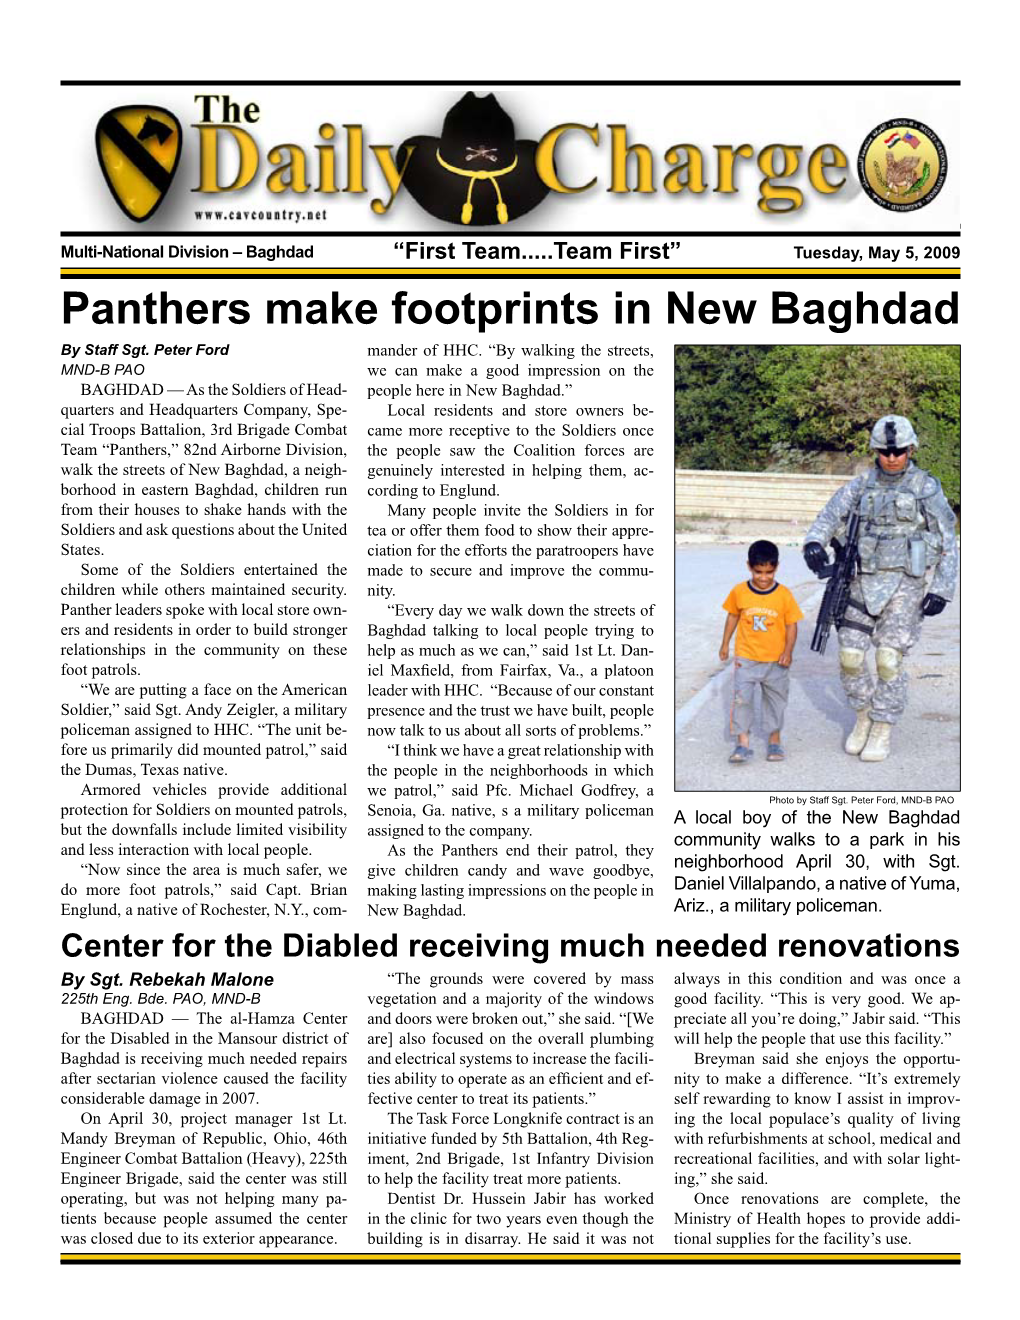 Panthers Make Footprints in New Baghdad by Staff Sgt